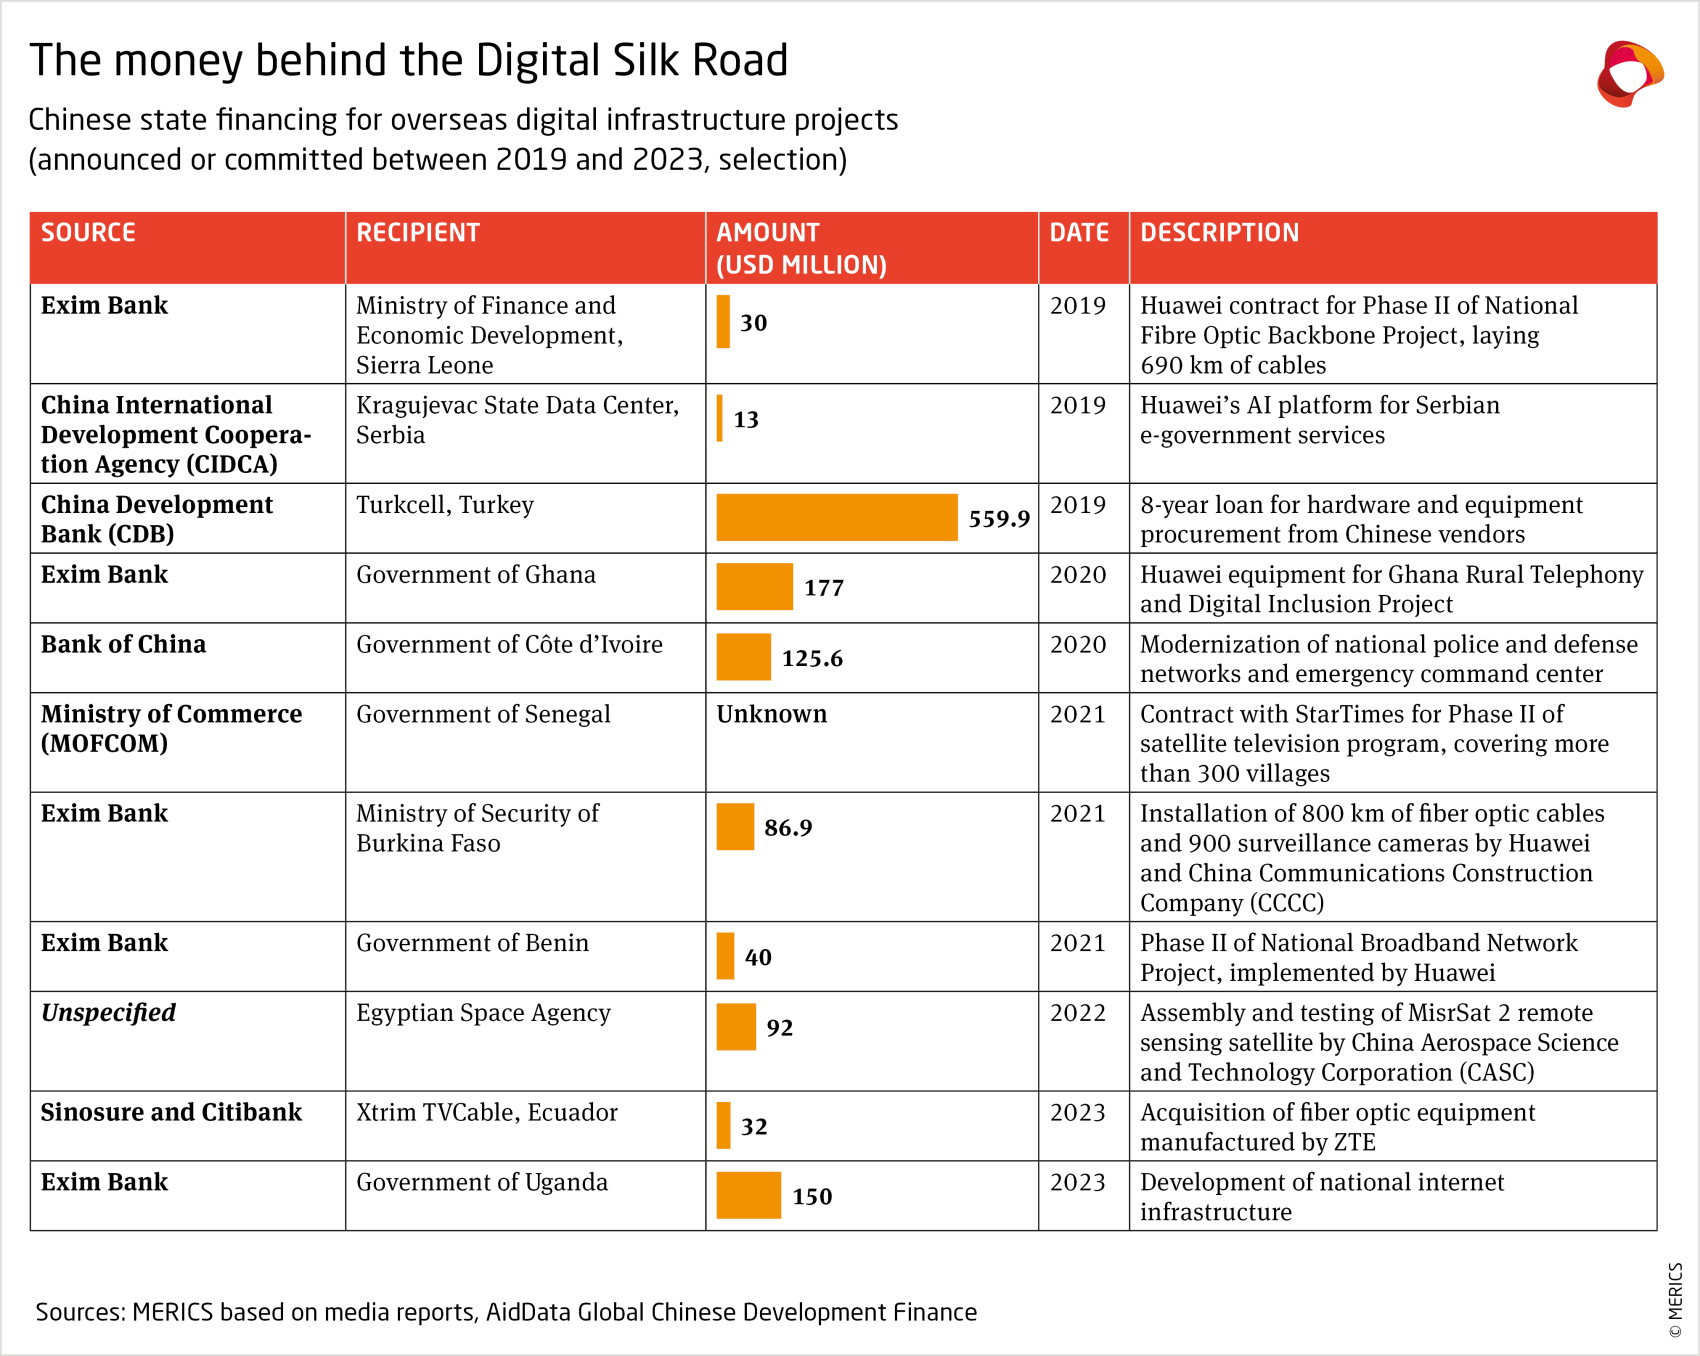 merics-chinese-state-financing-for-overseas-digital-infrastructure-projects-between-2019-and-2023.png